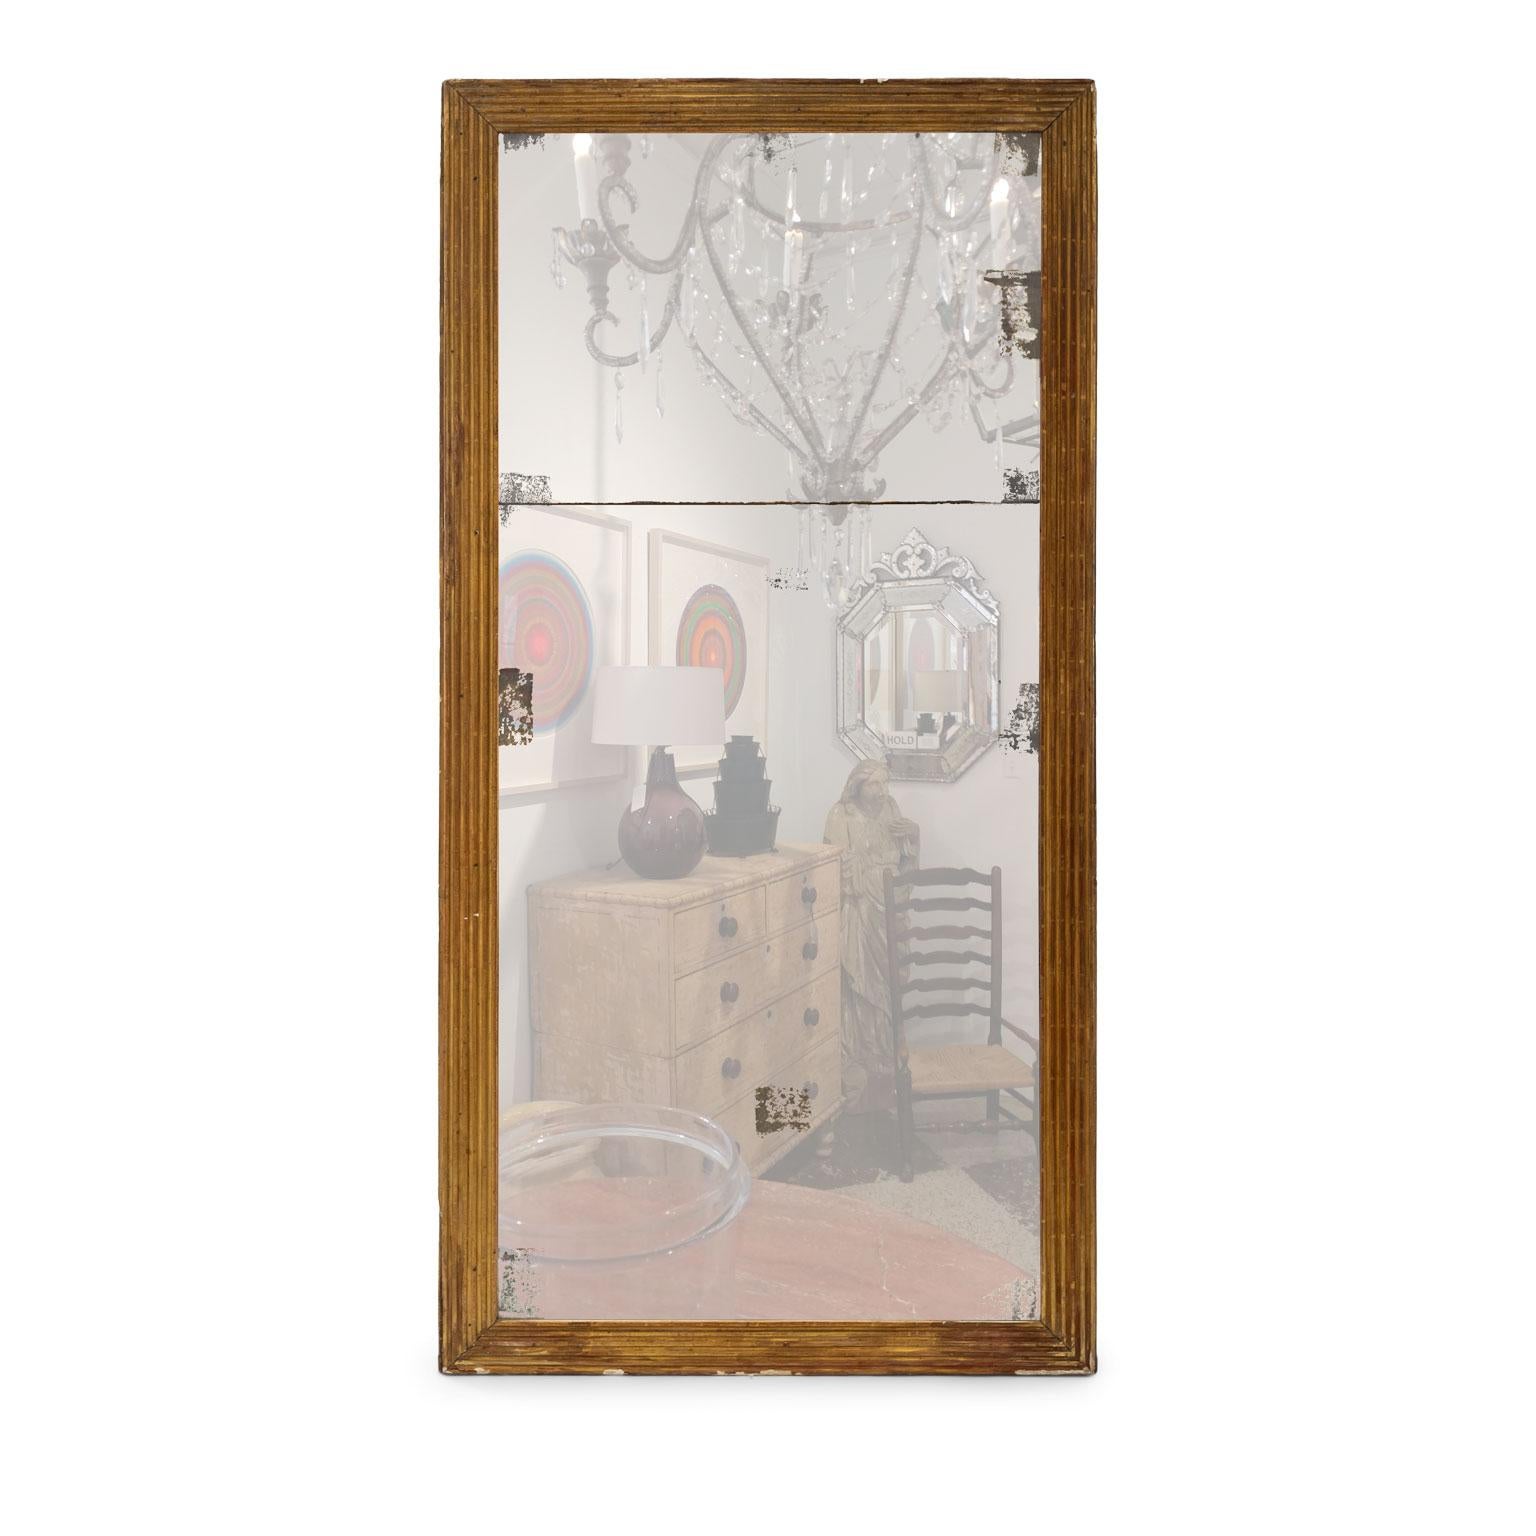 Early 19th century fluted giltwood mirror frame surrounding original mercury mirror split-plate. Mirror glass features losses to silvered reverse and diamond dust around edges.

Note: Regional differences in humidity and climate during shipping may